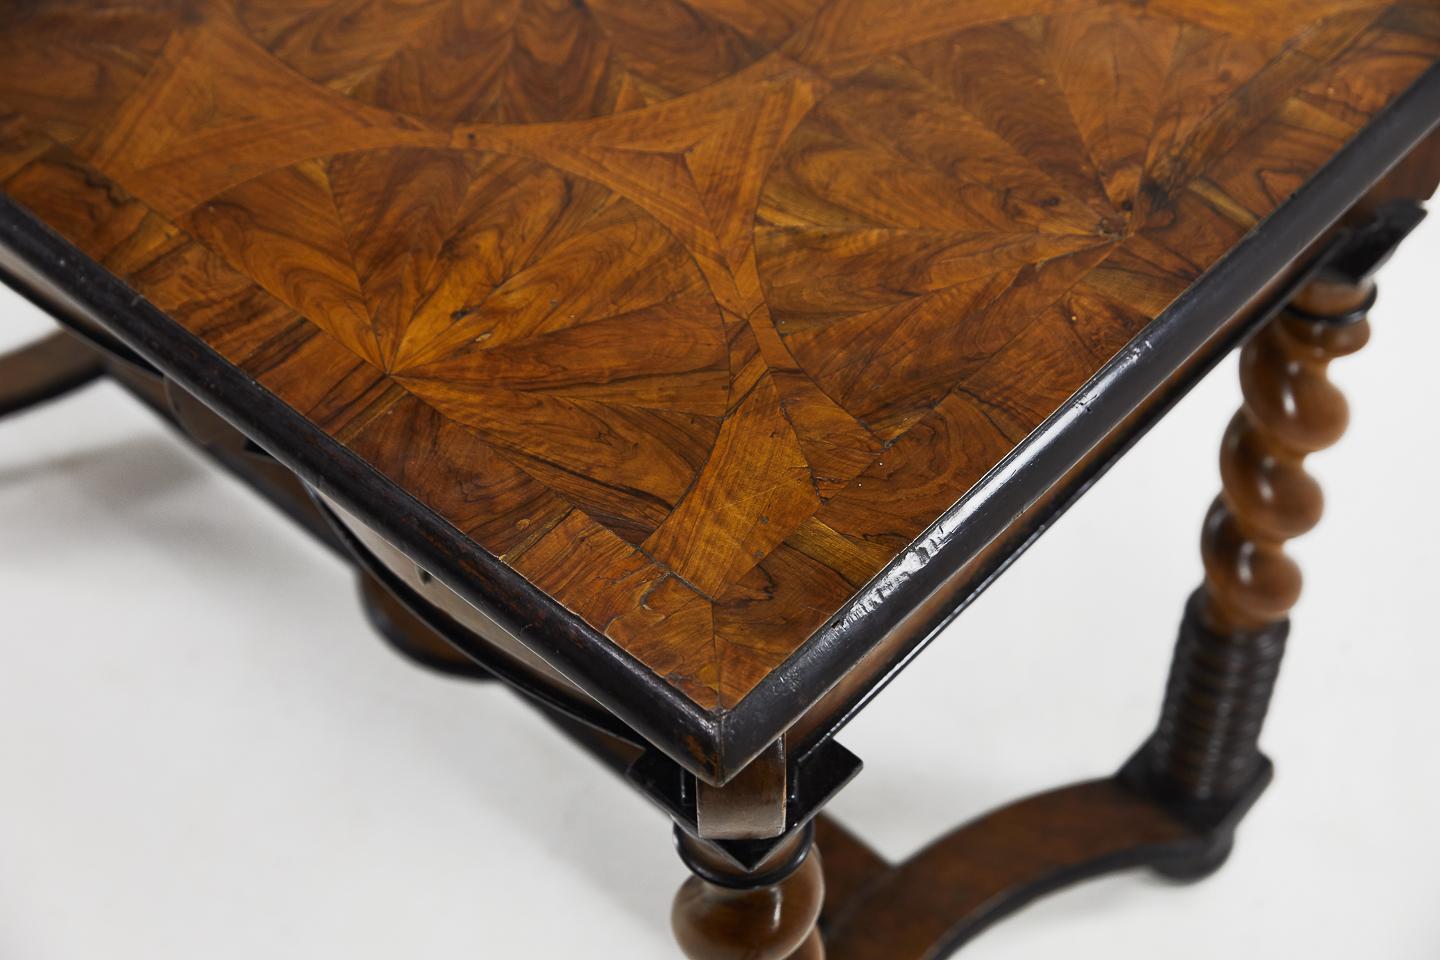 Inlay Early 18th Century French Inlaid Walnut Table